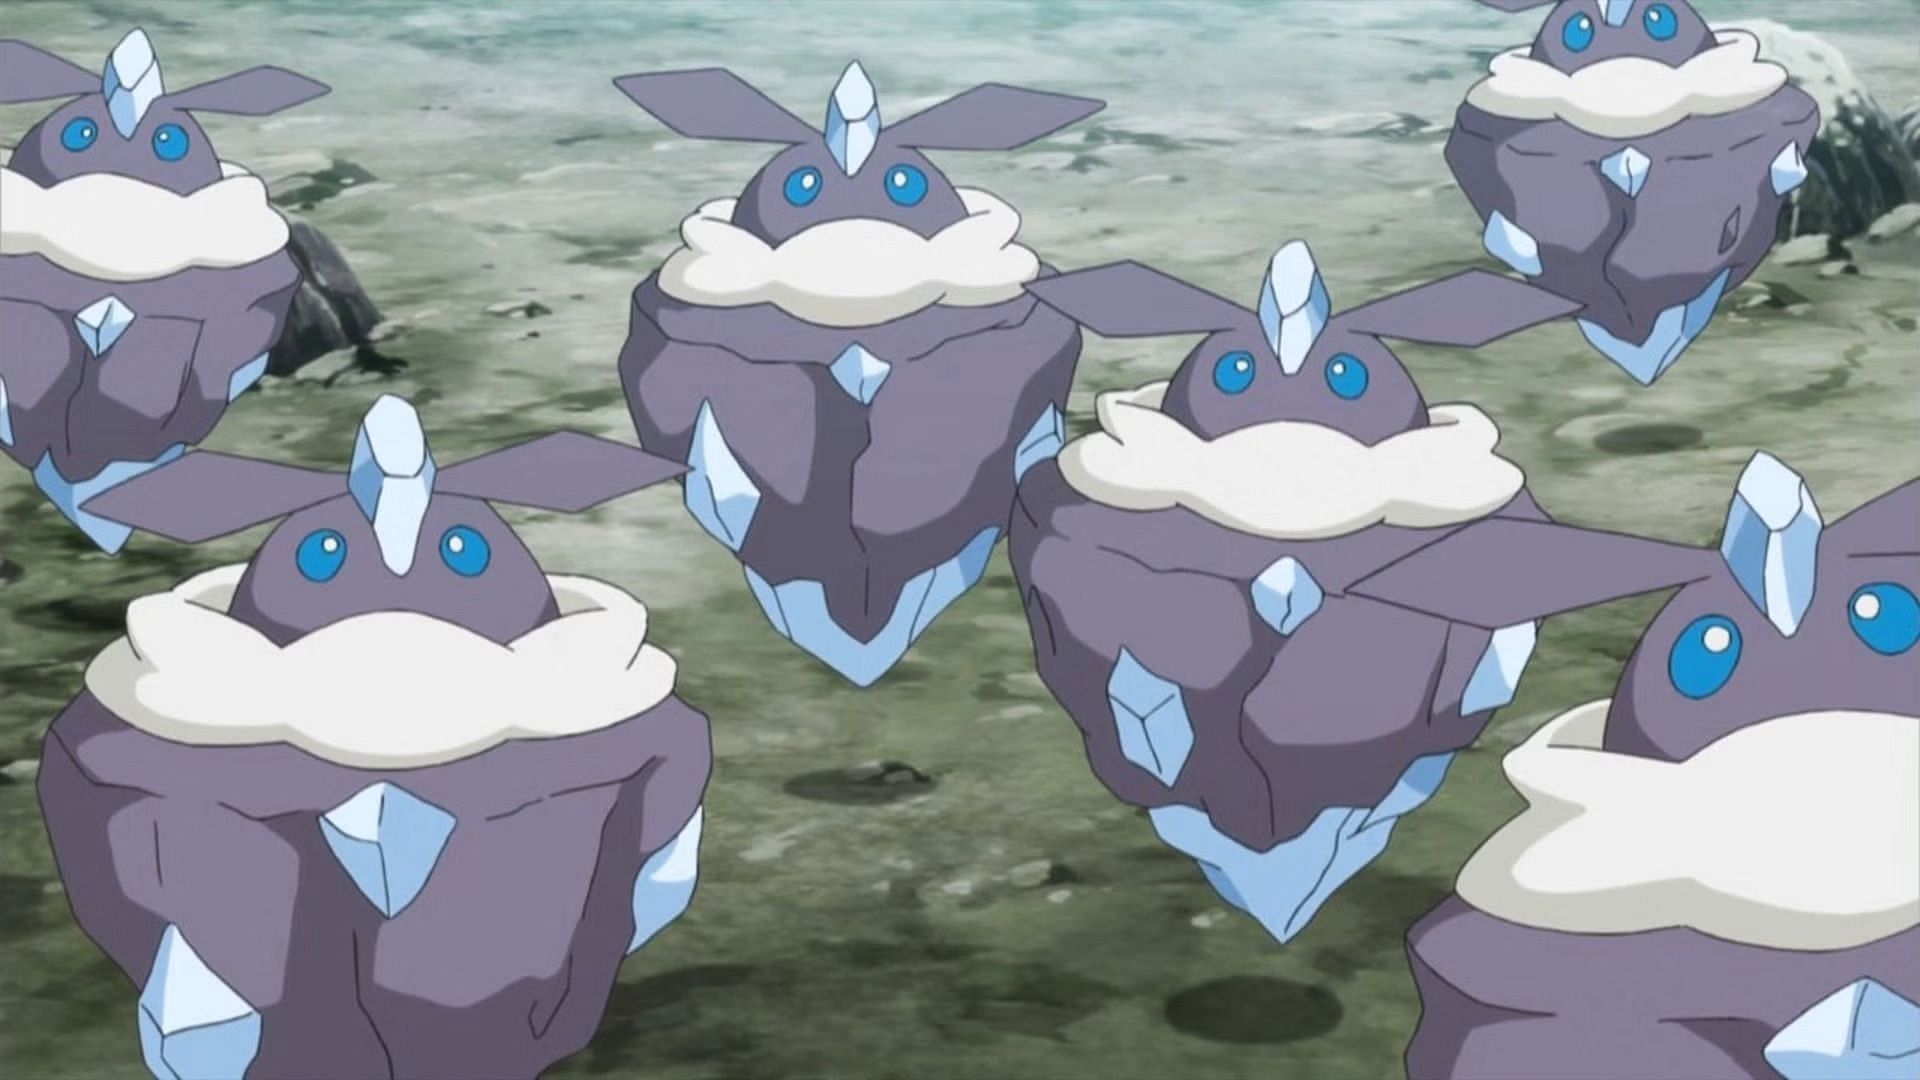 Carbink, as seen in the anime (Image via The Pokemon Company)